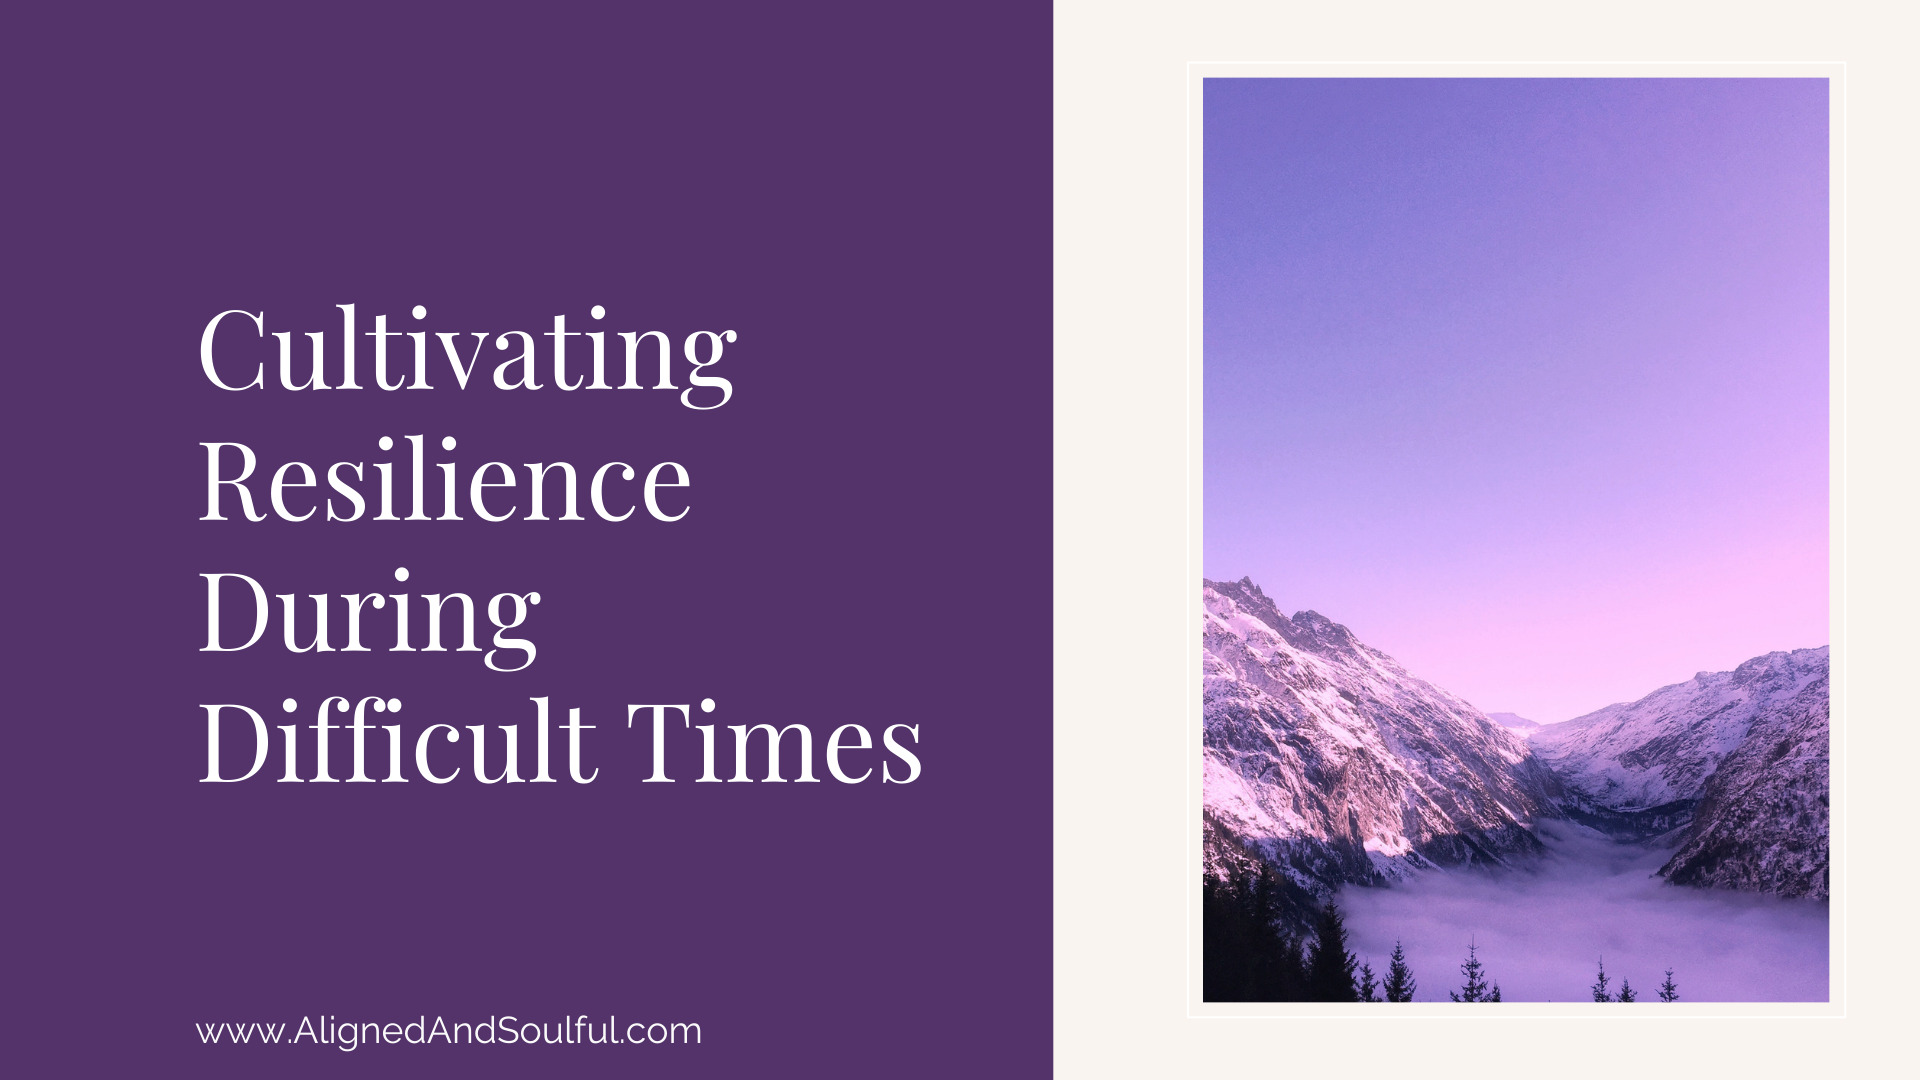 Cultivating Resilience During Difficult Times